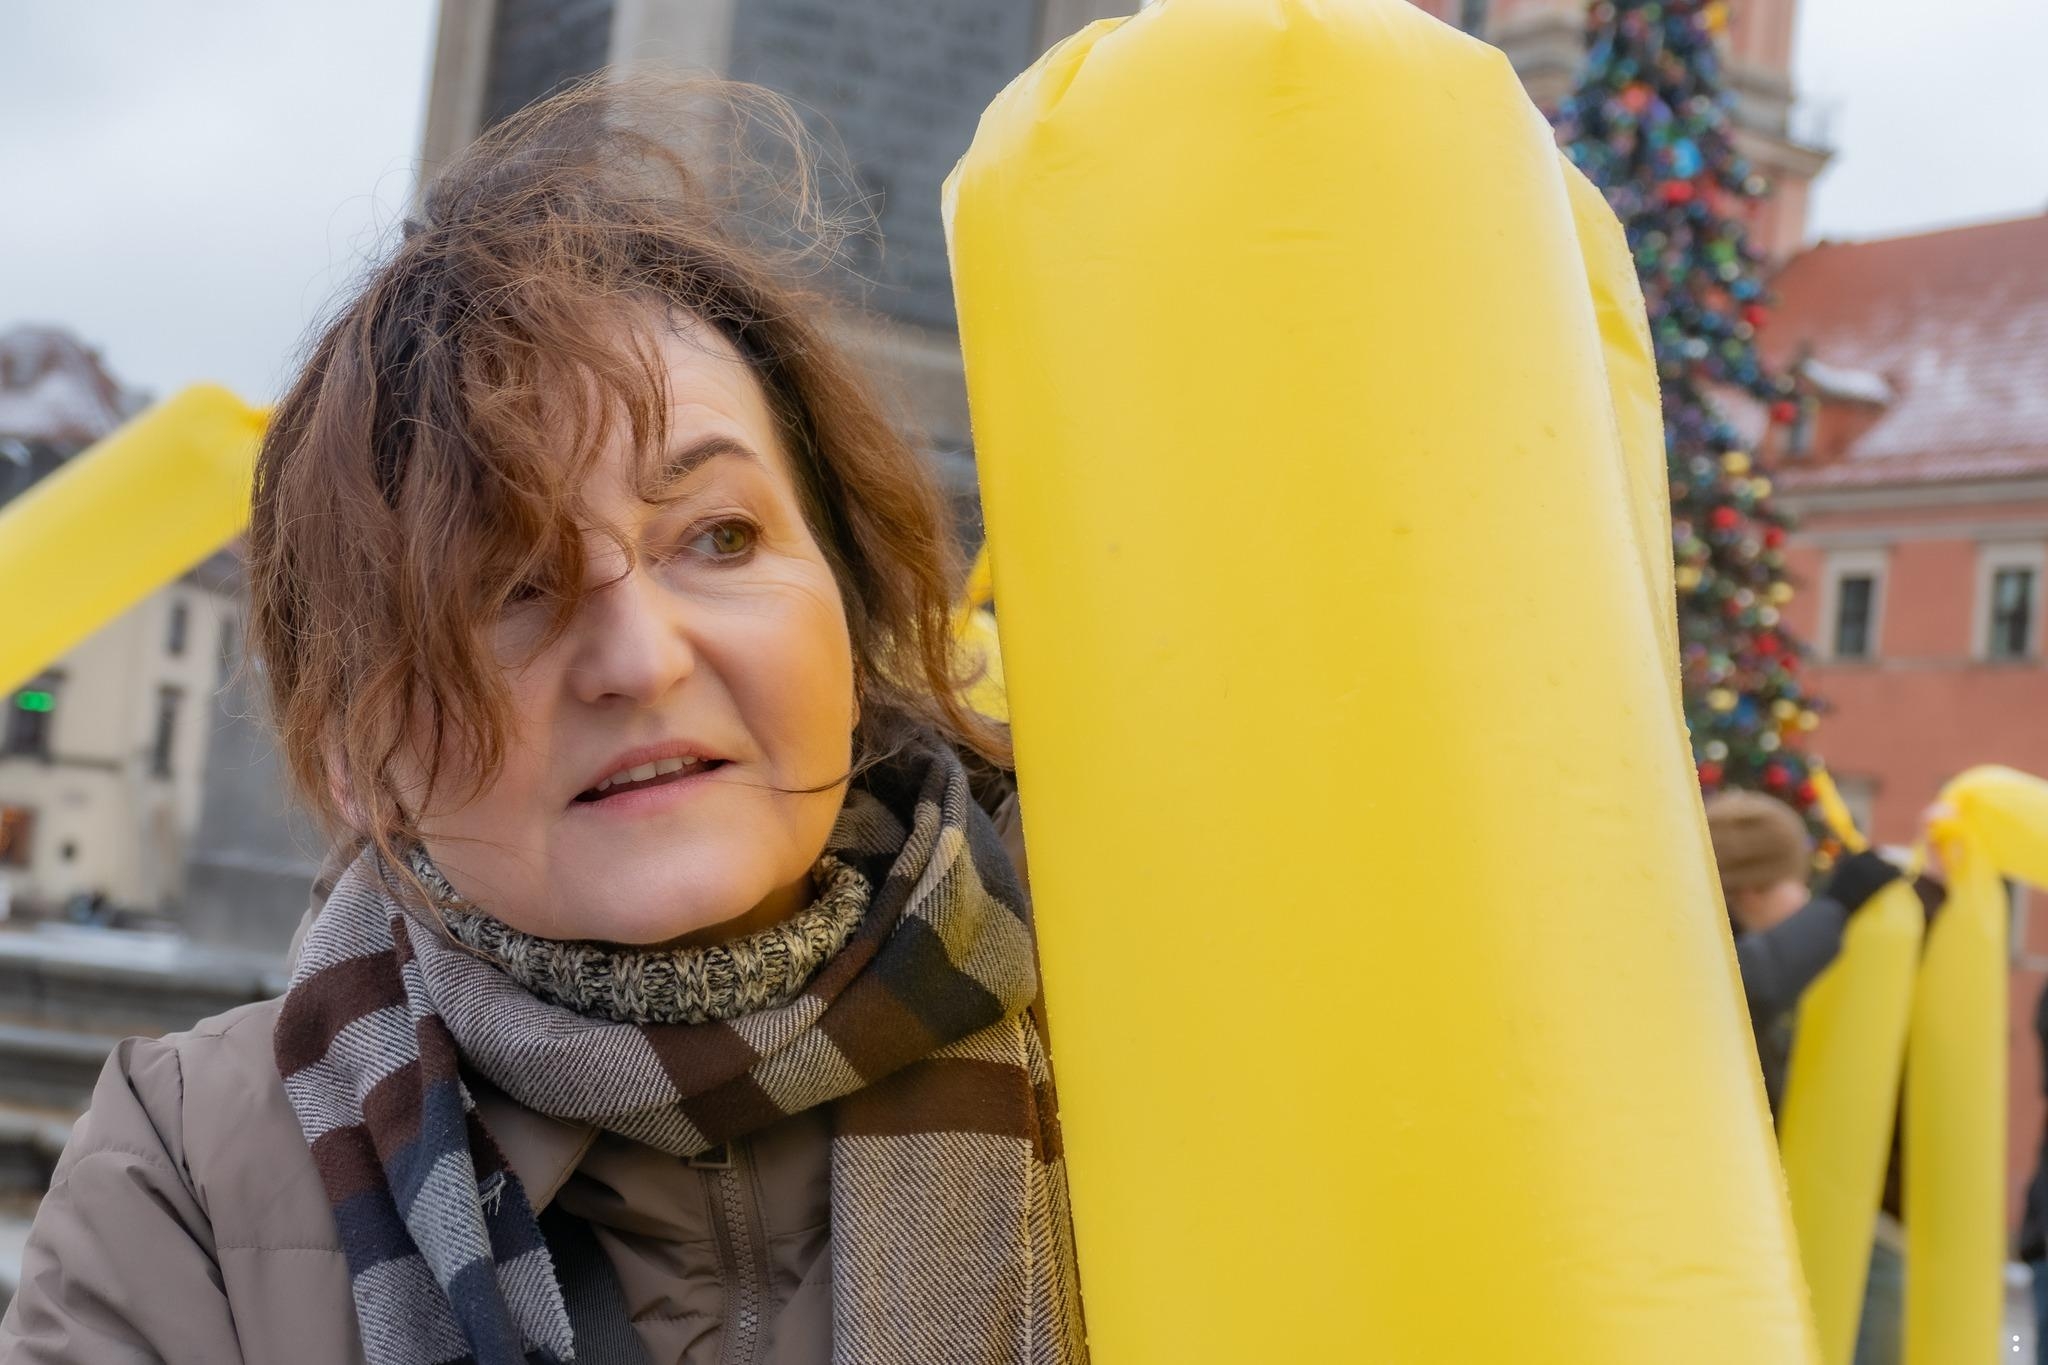 Tie a yellow ribbon! - this was the main motive of the demonstration // A demonstration in Warsaw marking 100 days